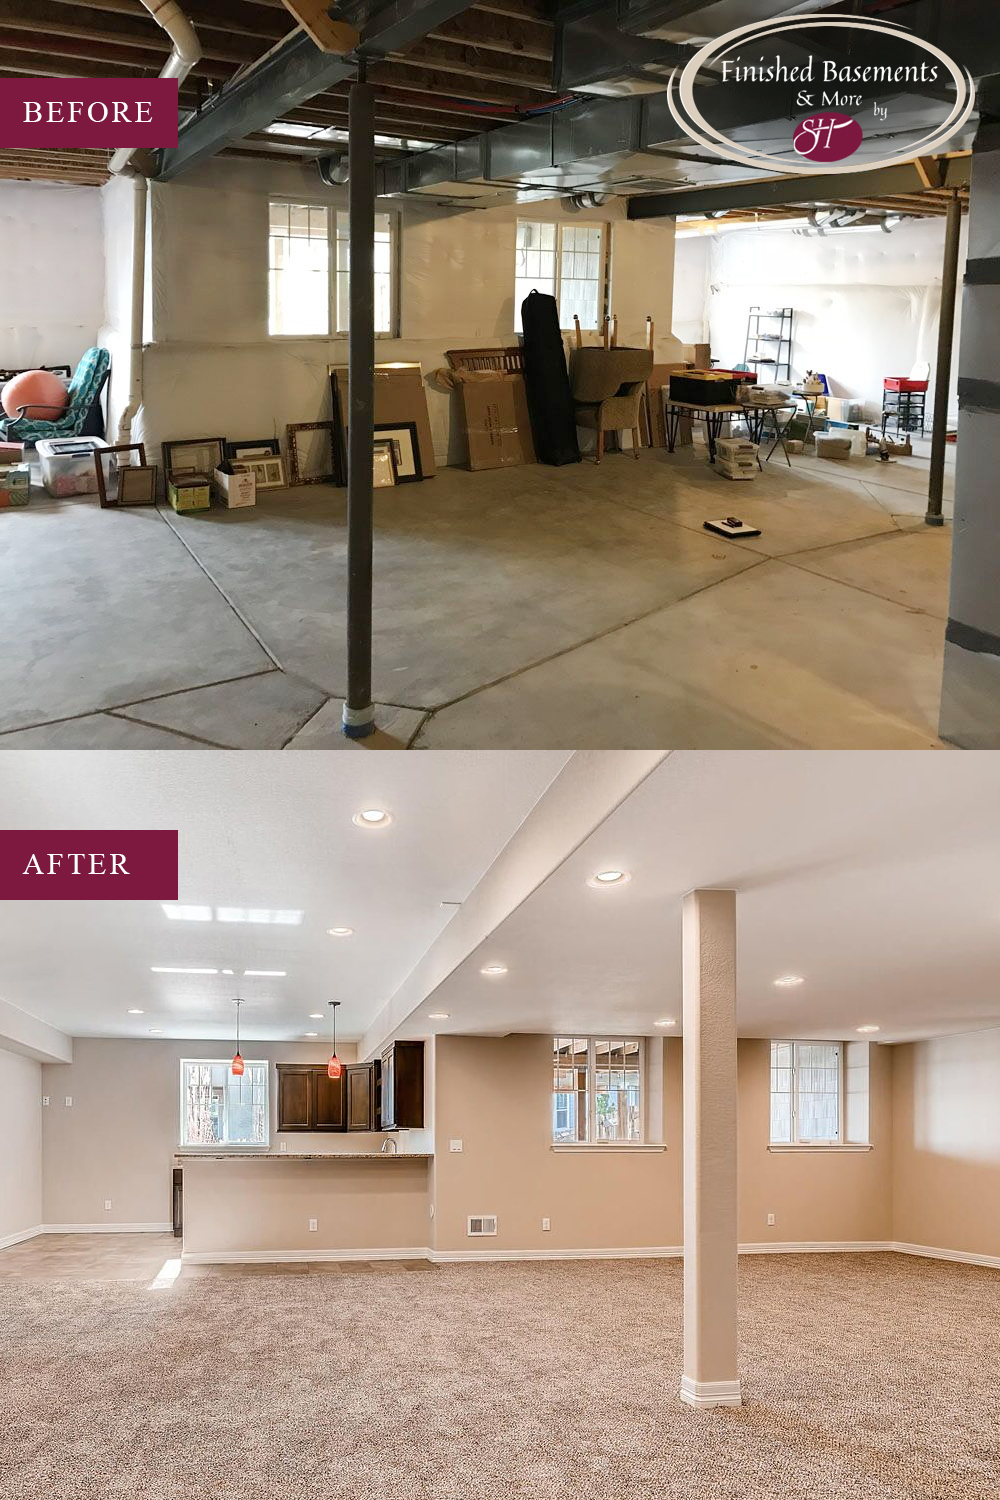 5 Basement Remodel Before And Afters Sheffield Homes Finished Basements And More